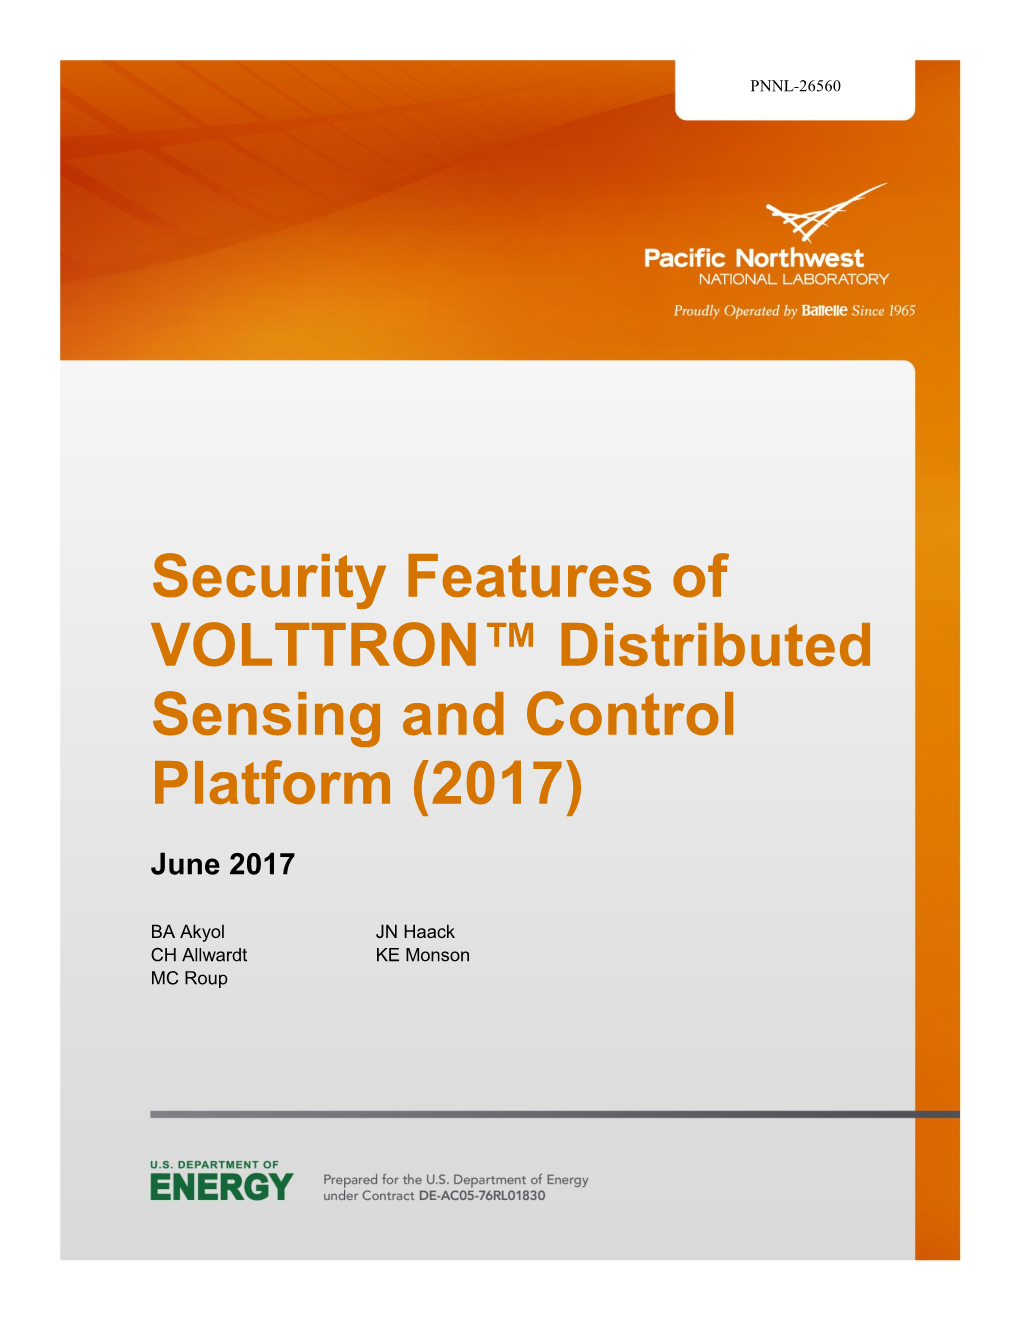 Security Features of VOLTTRON™ Distributed Sensing and Control Platform (2017)